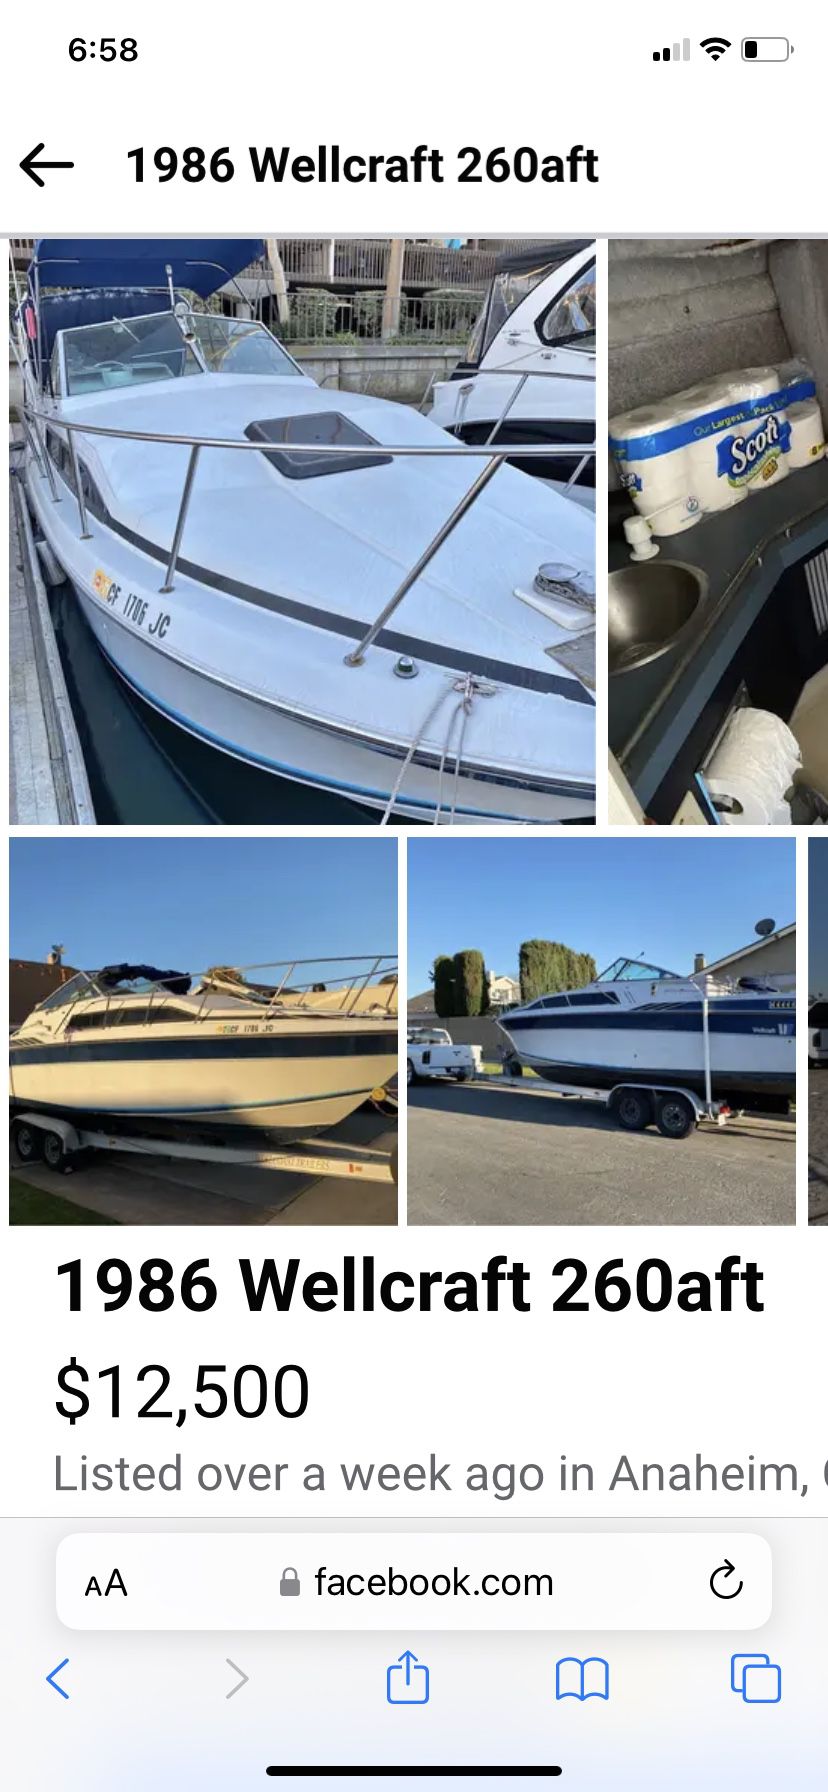 1986 Wellcraft Aft Cabin 26’ Boat With Trailer. Fishing Boat 